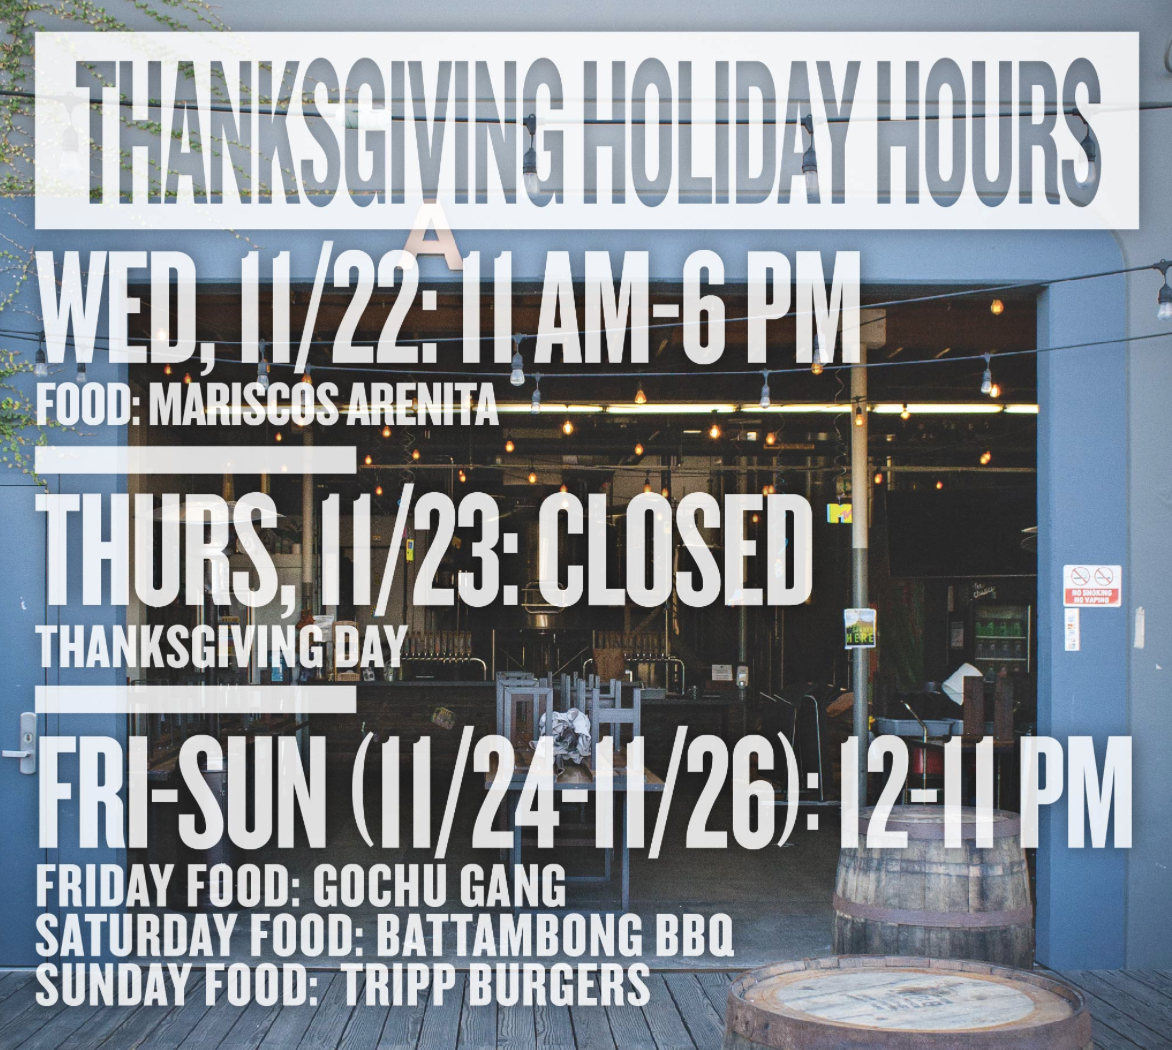 Thanksgiving Day – Closed